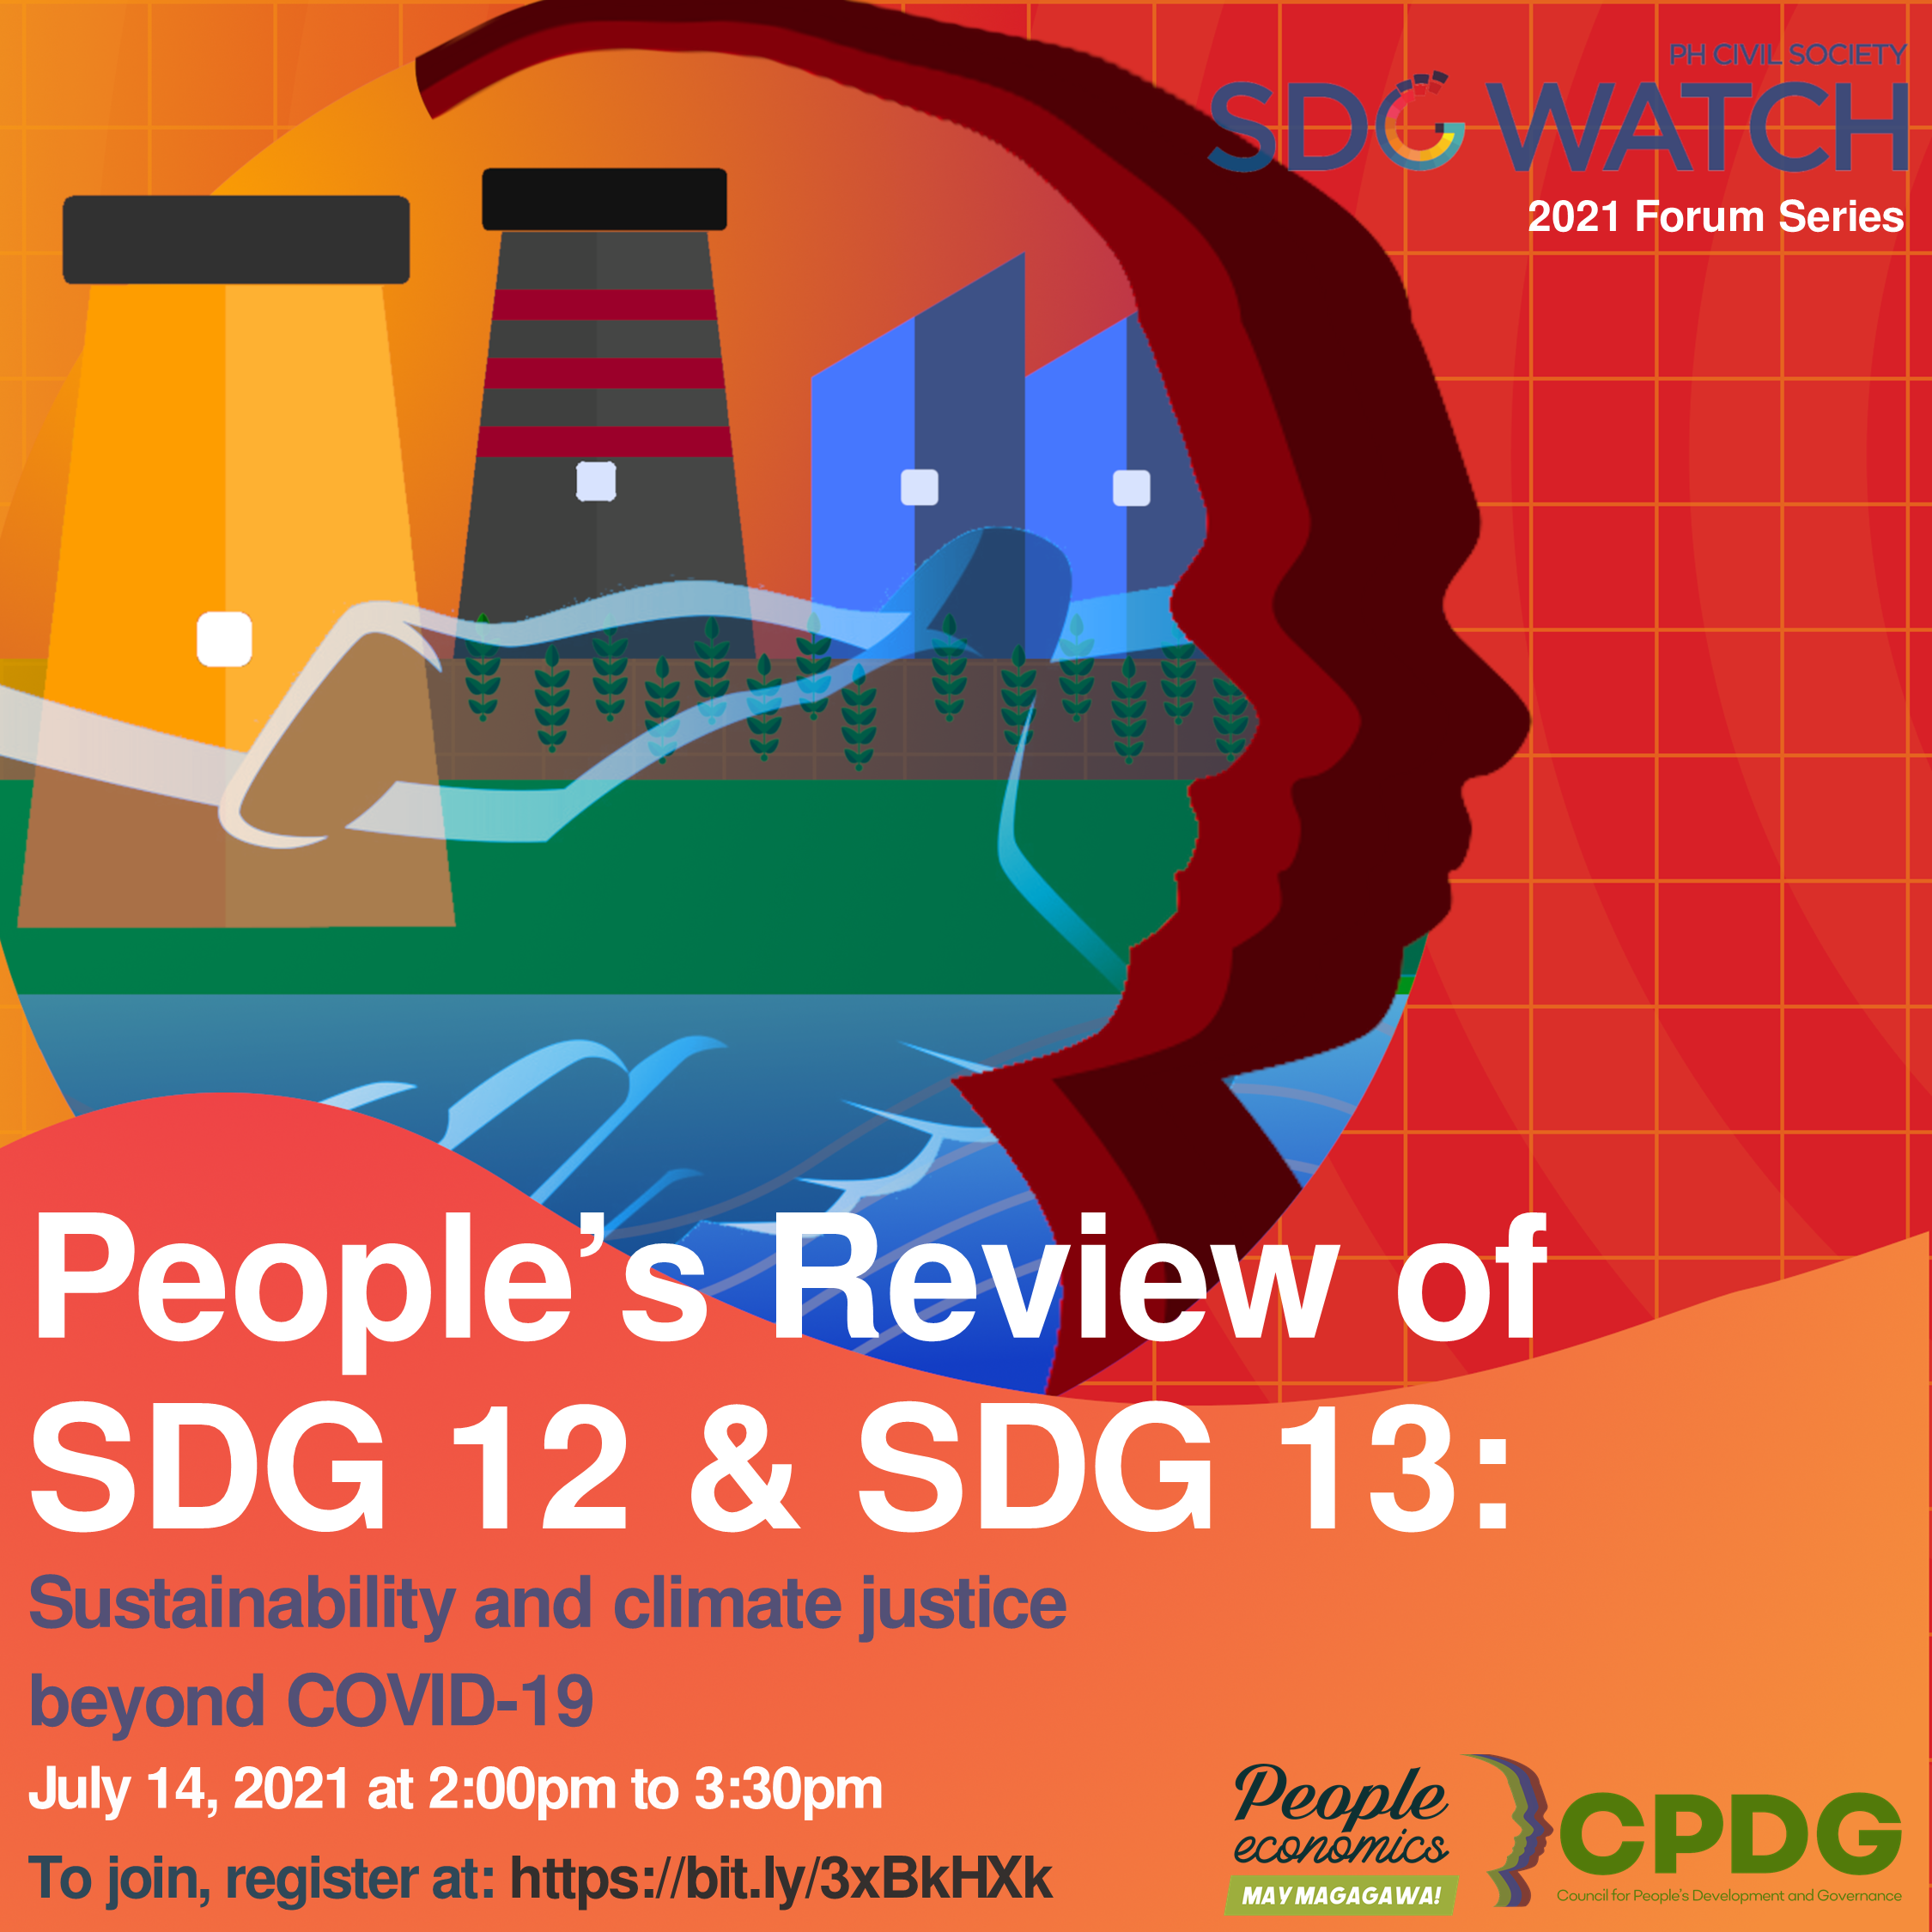 People’s Review of SDG 12 & 13: Sustainability and climate justice beyond COVID-19